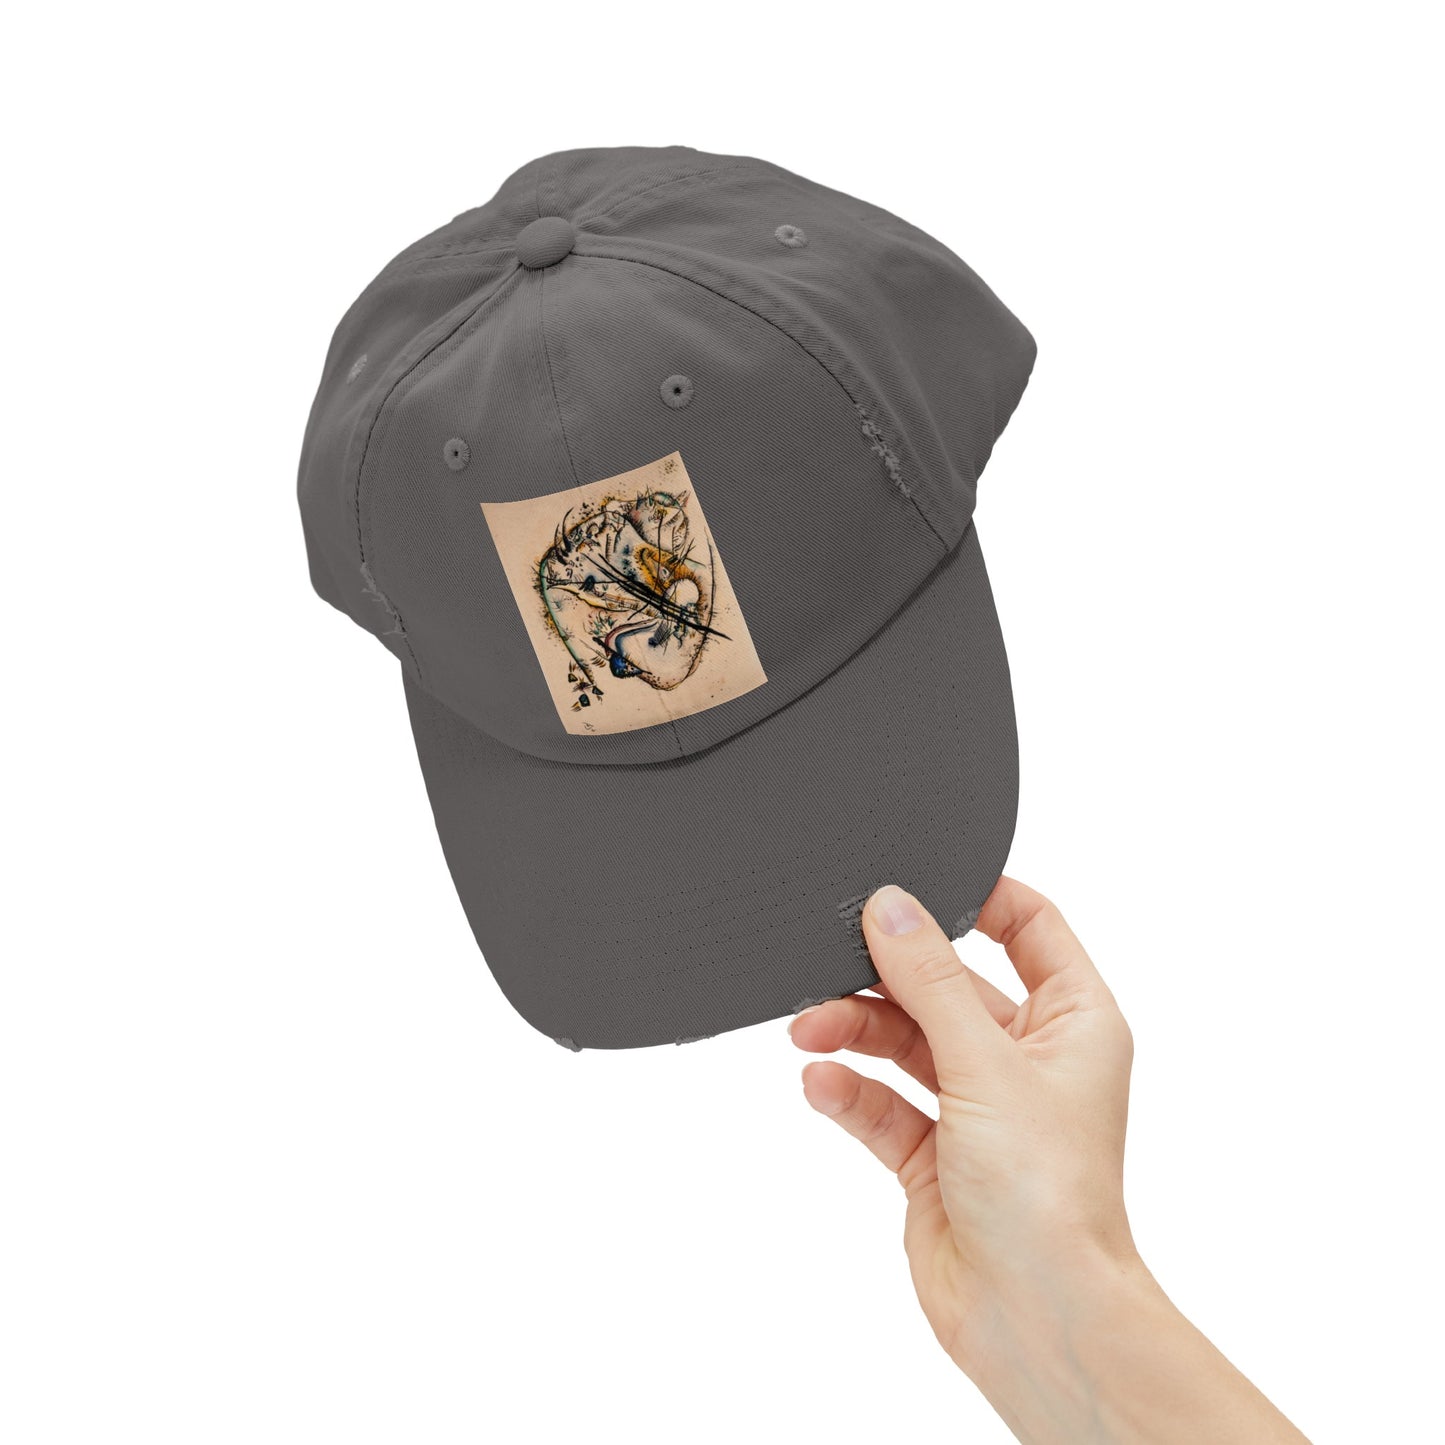 a person holding a gray hat with a sticker on it